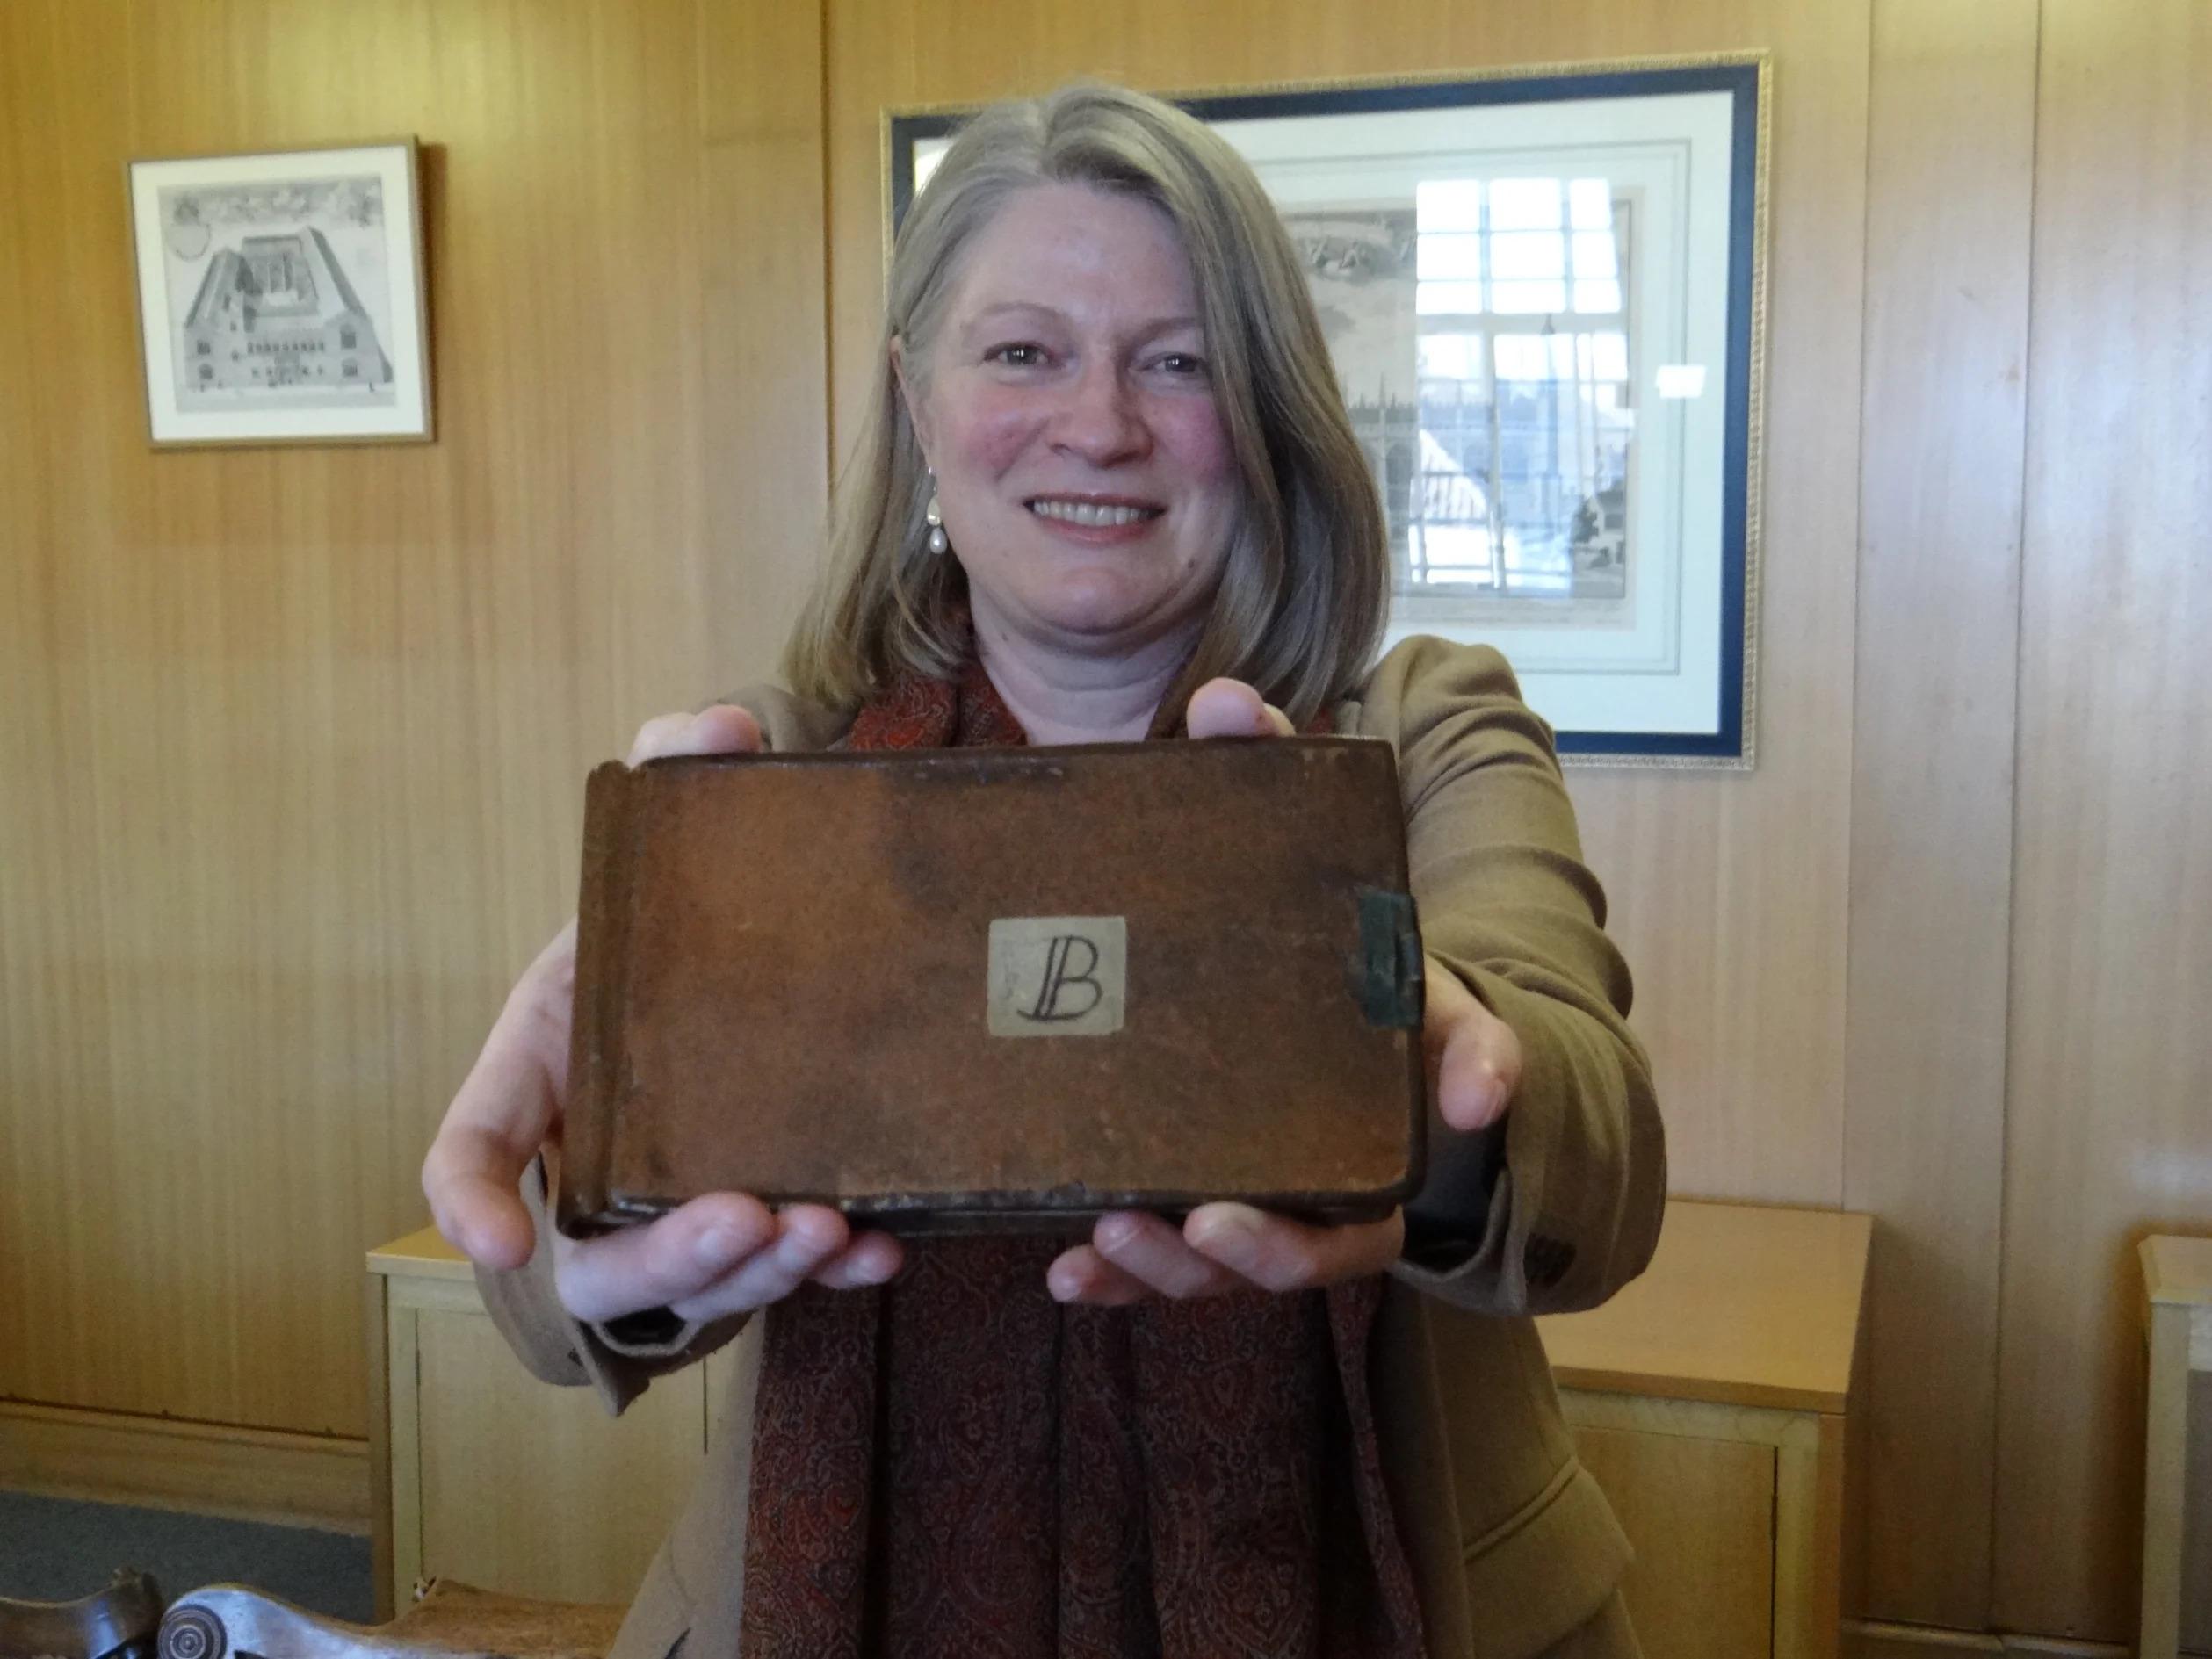 Jessica Gardner and one of the returned notebooks (Source: University of Cambridge/reproduction)